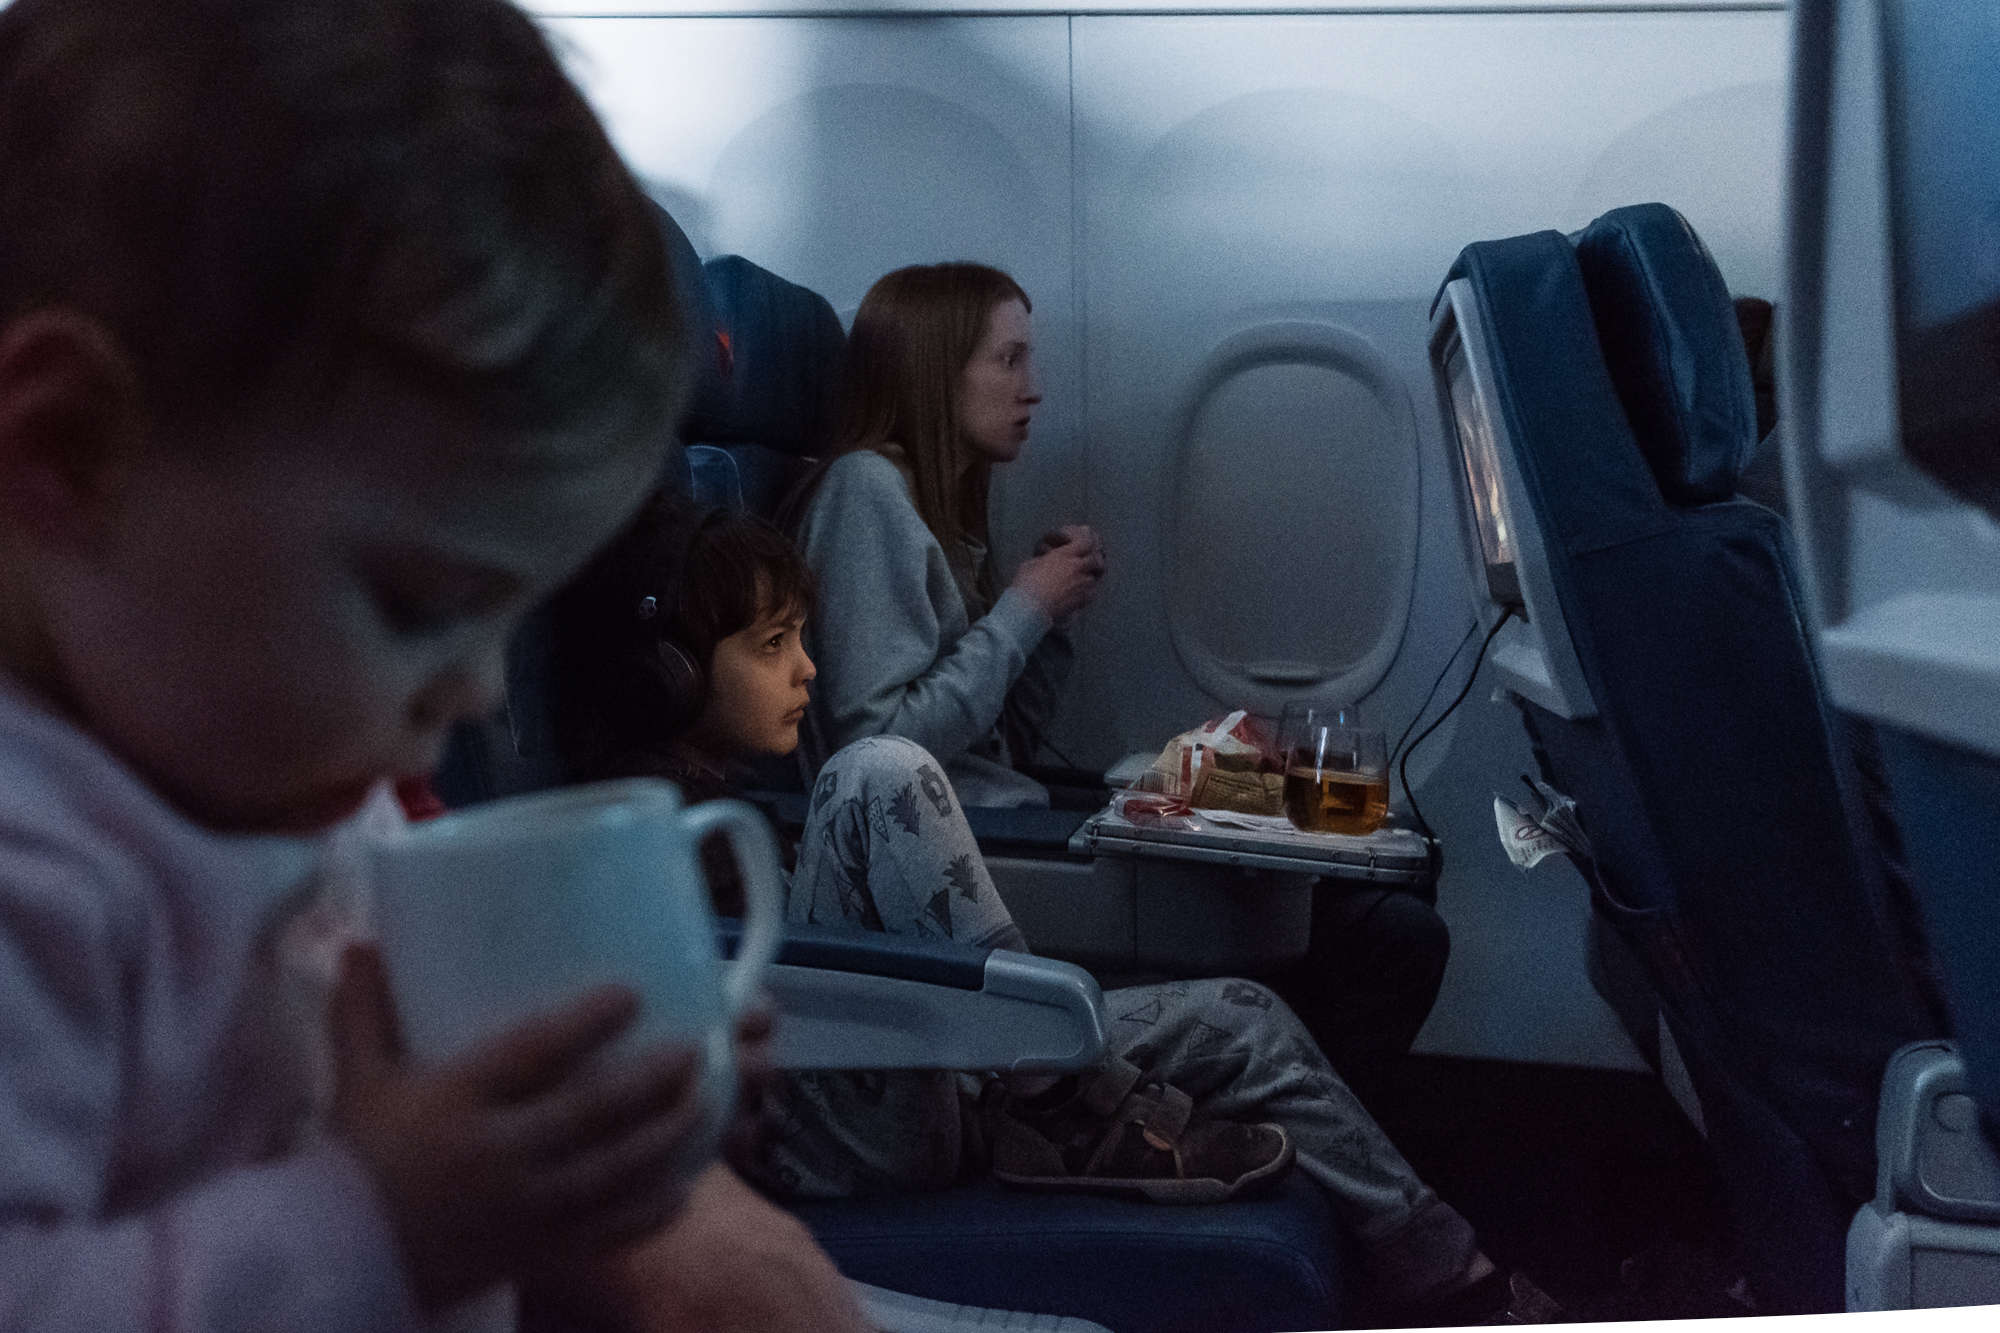 boy watching TV on plane - Documentary Family Photography